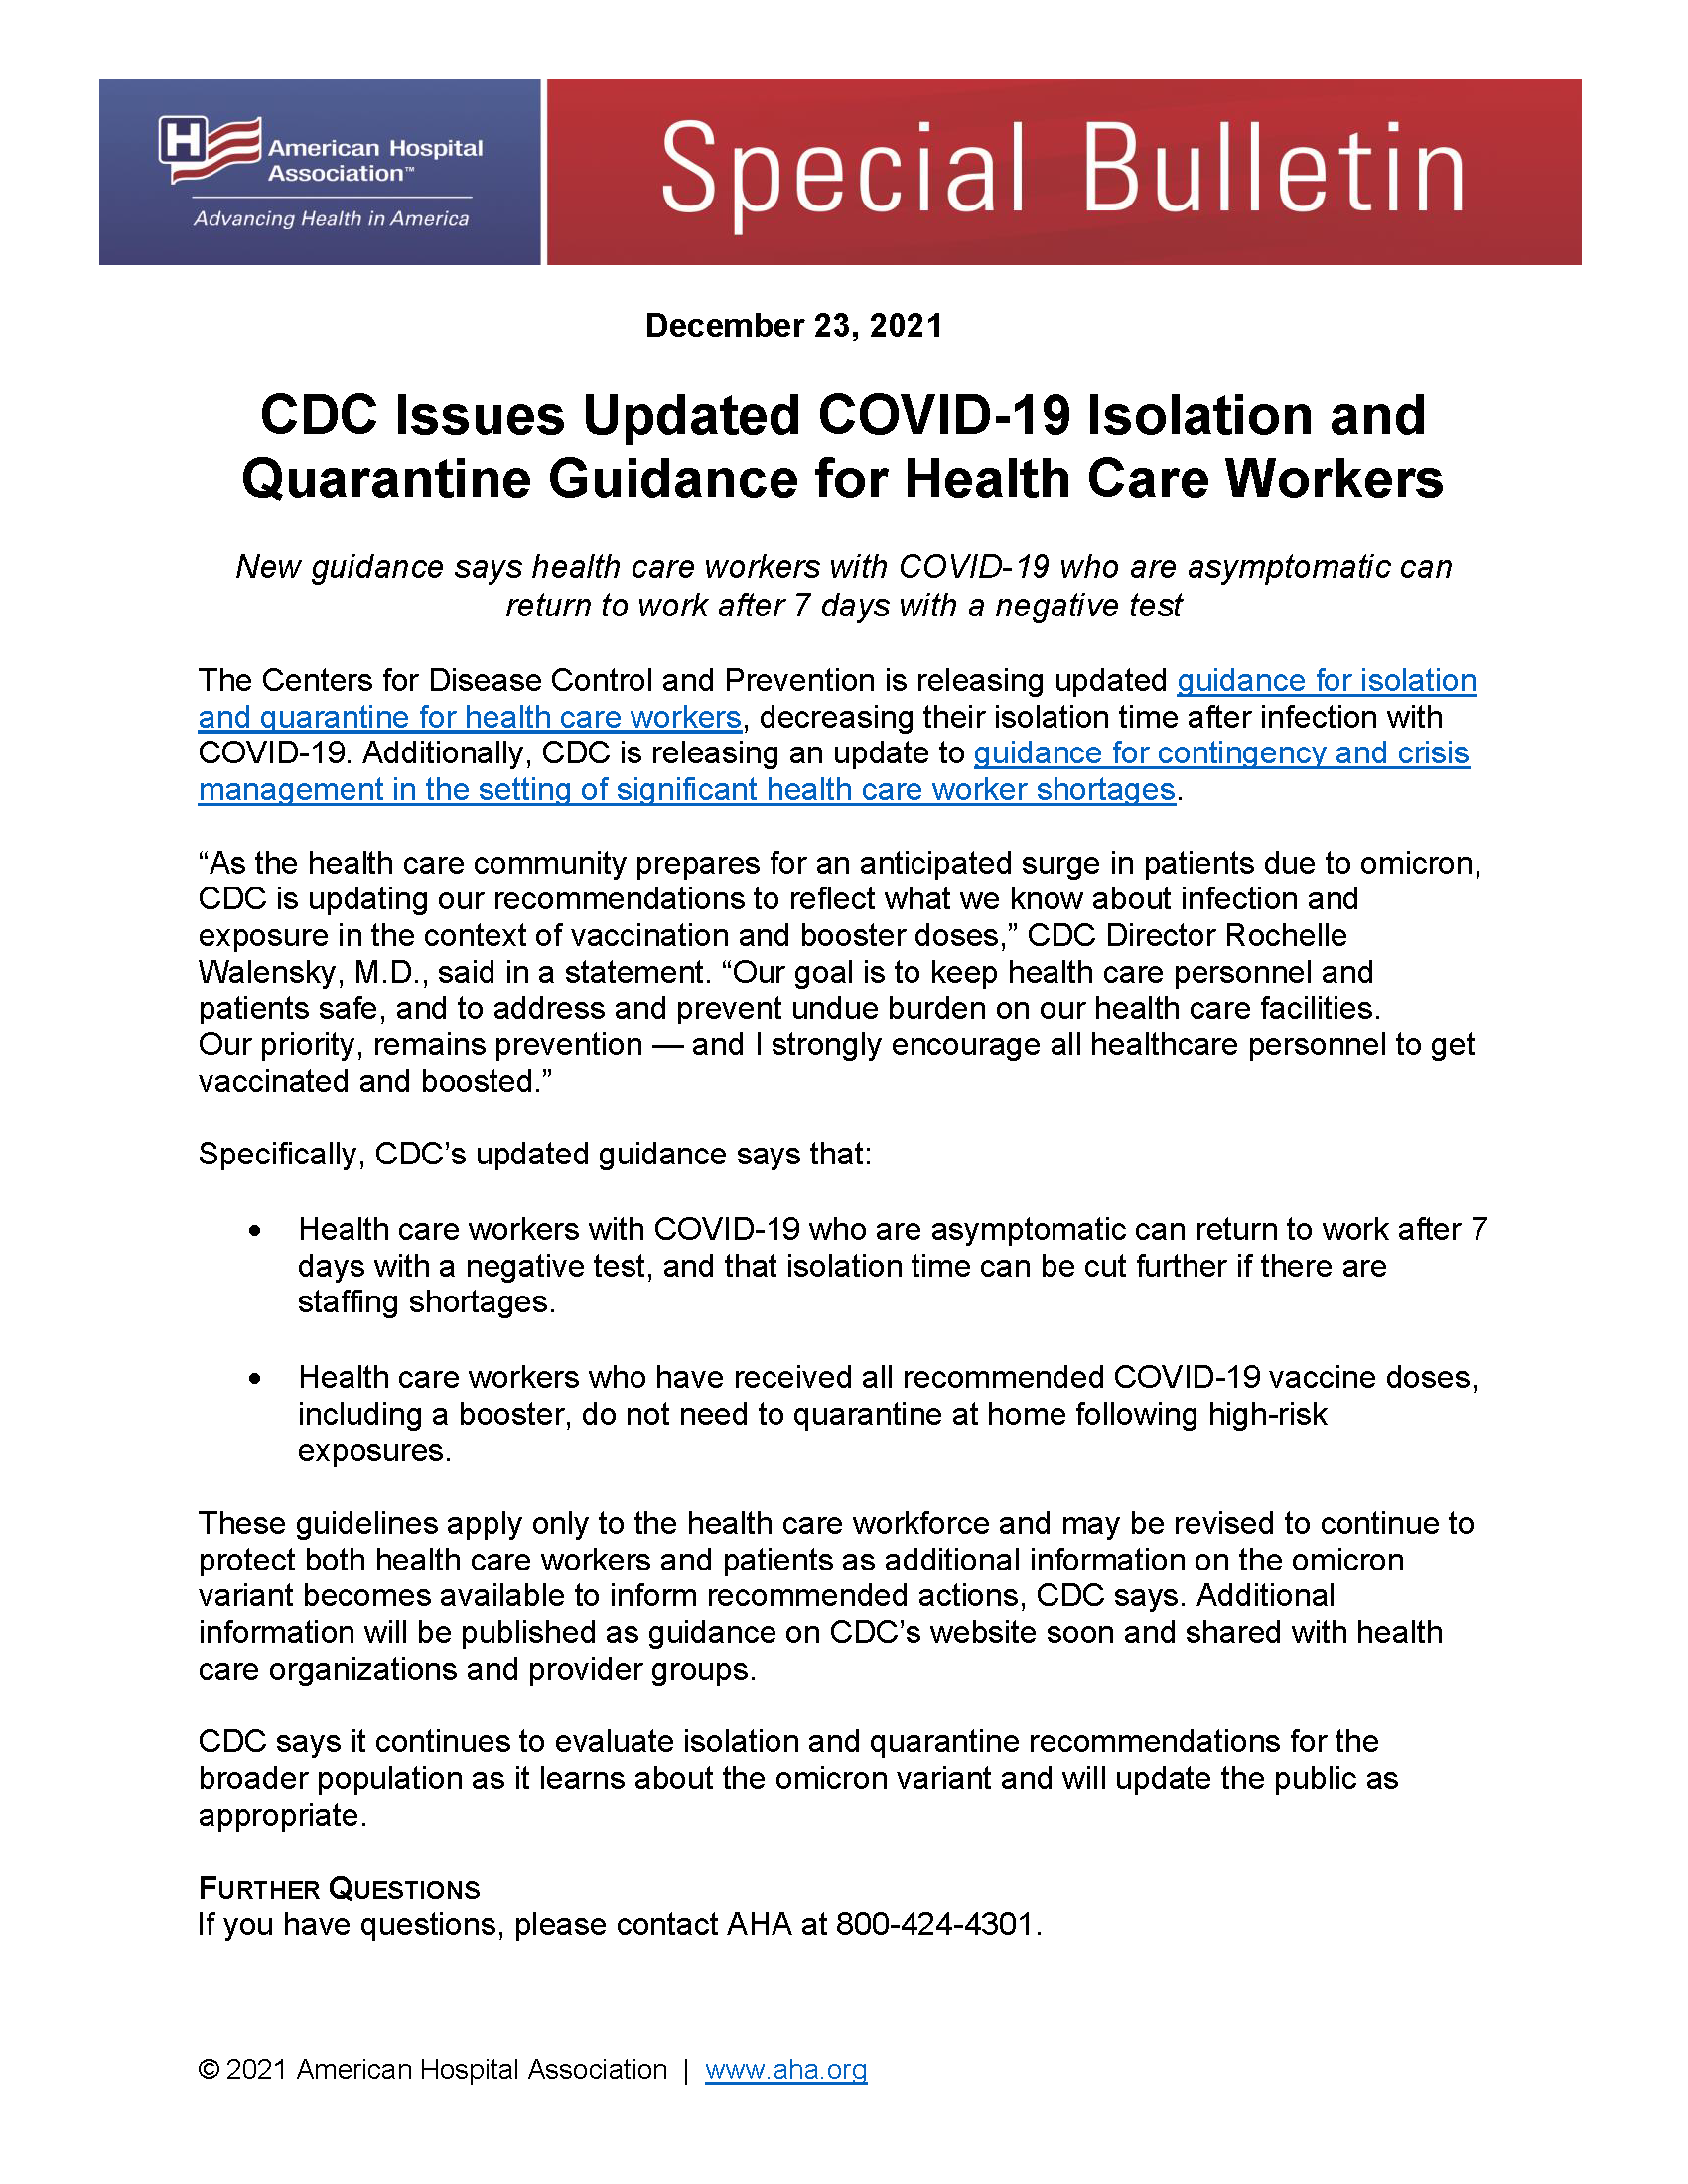 CDC Issues Updated COVID19 Isolation and Quarantine Guidance for